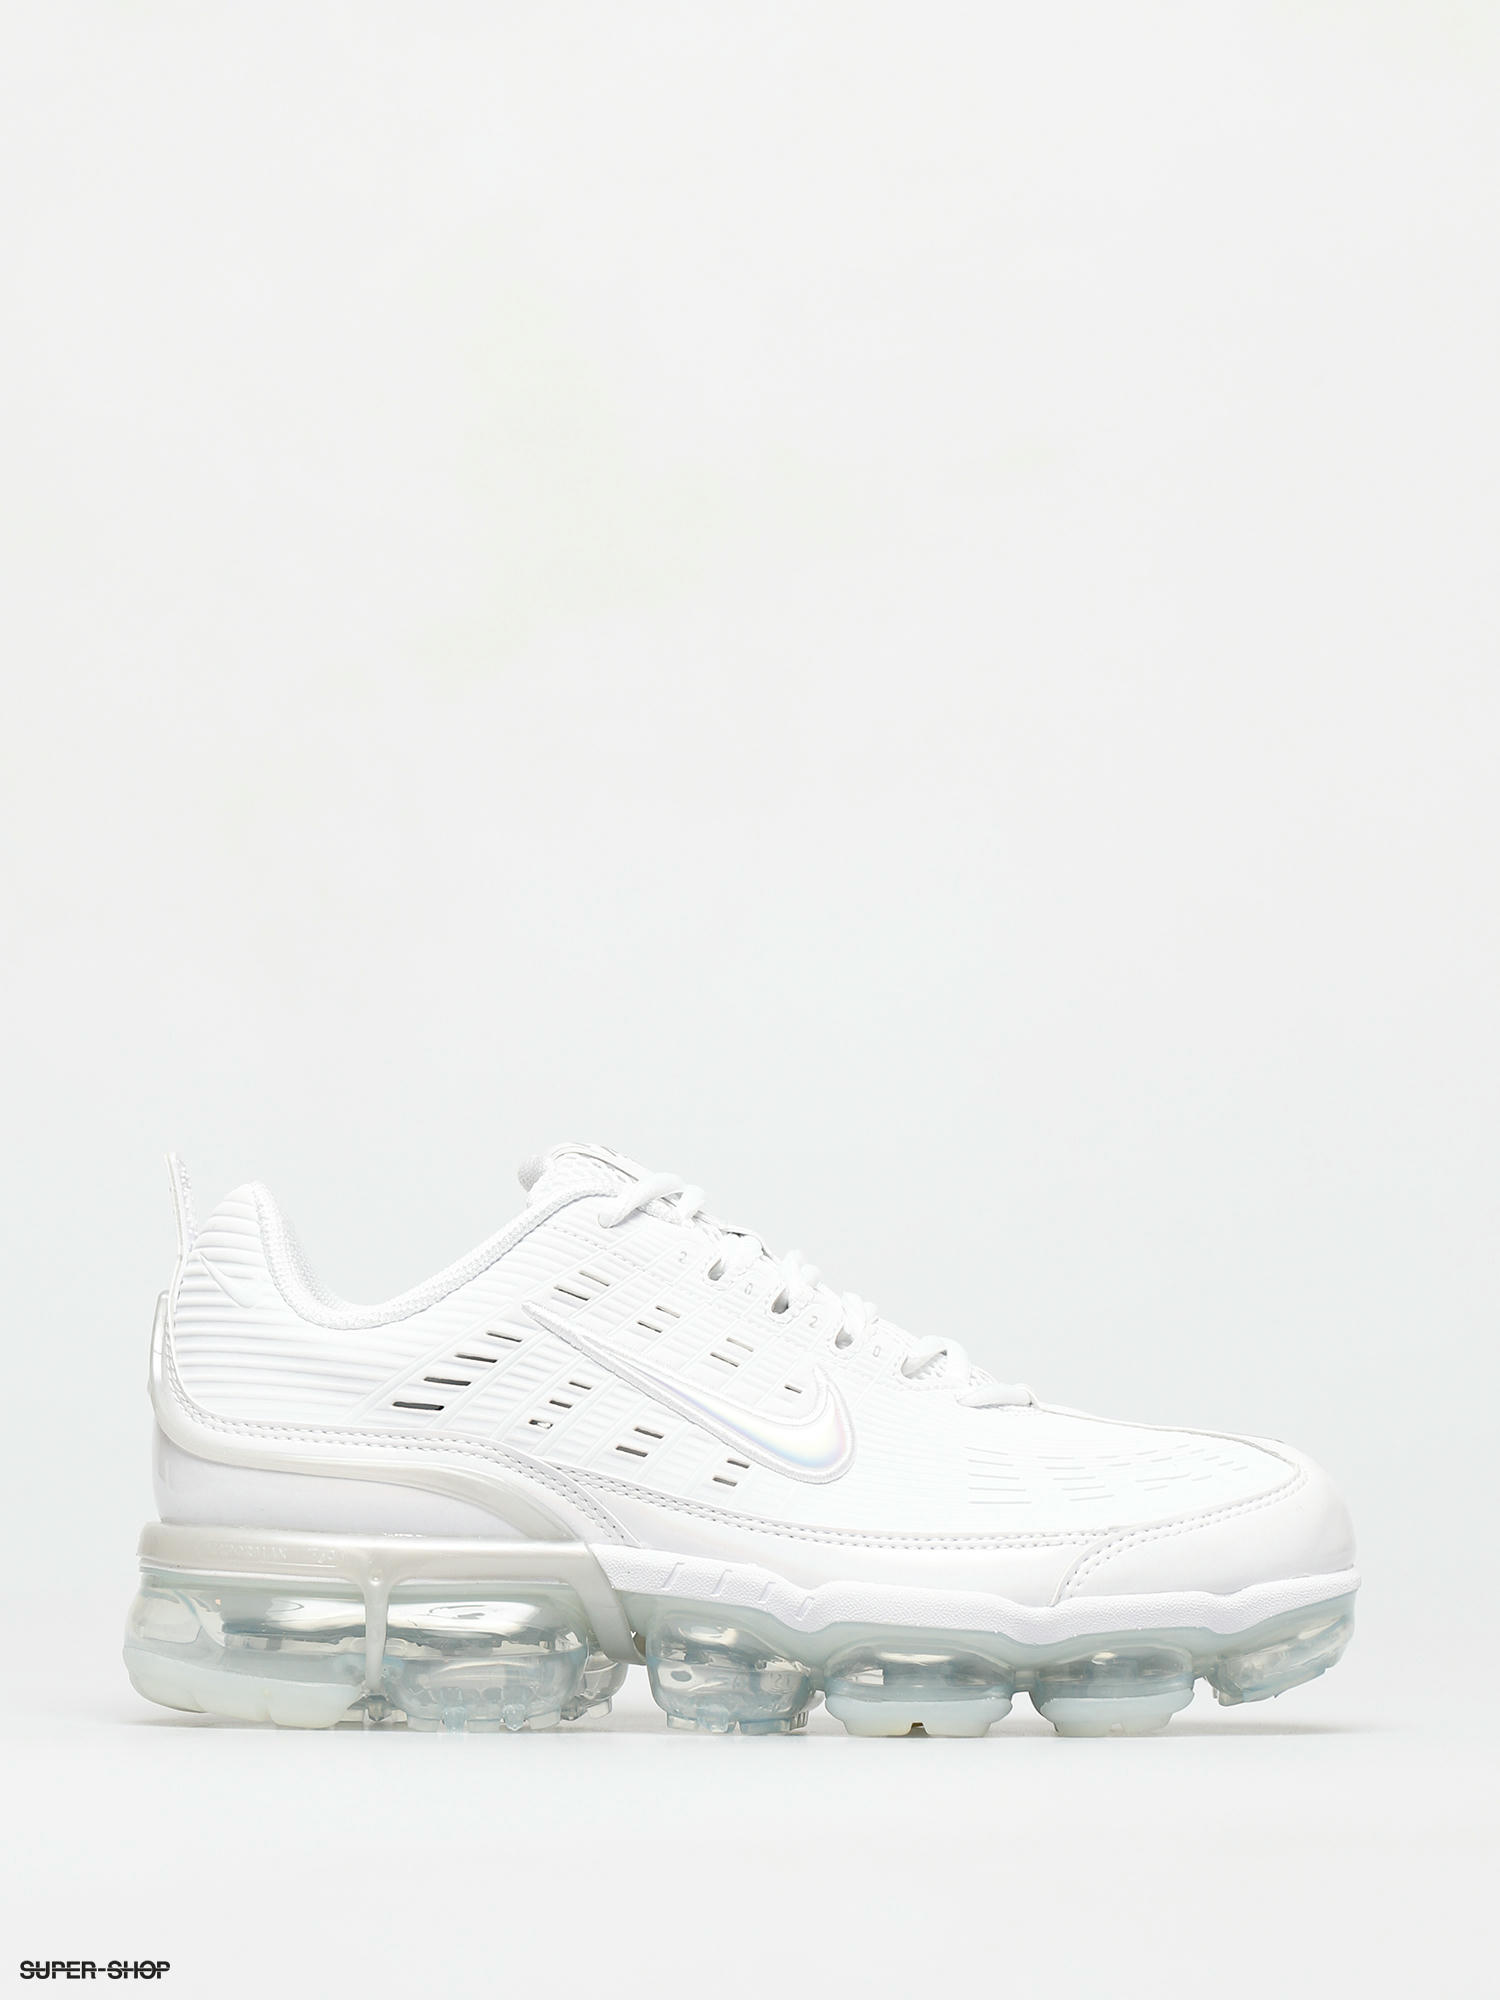 nike vapormax white and silver